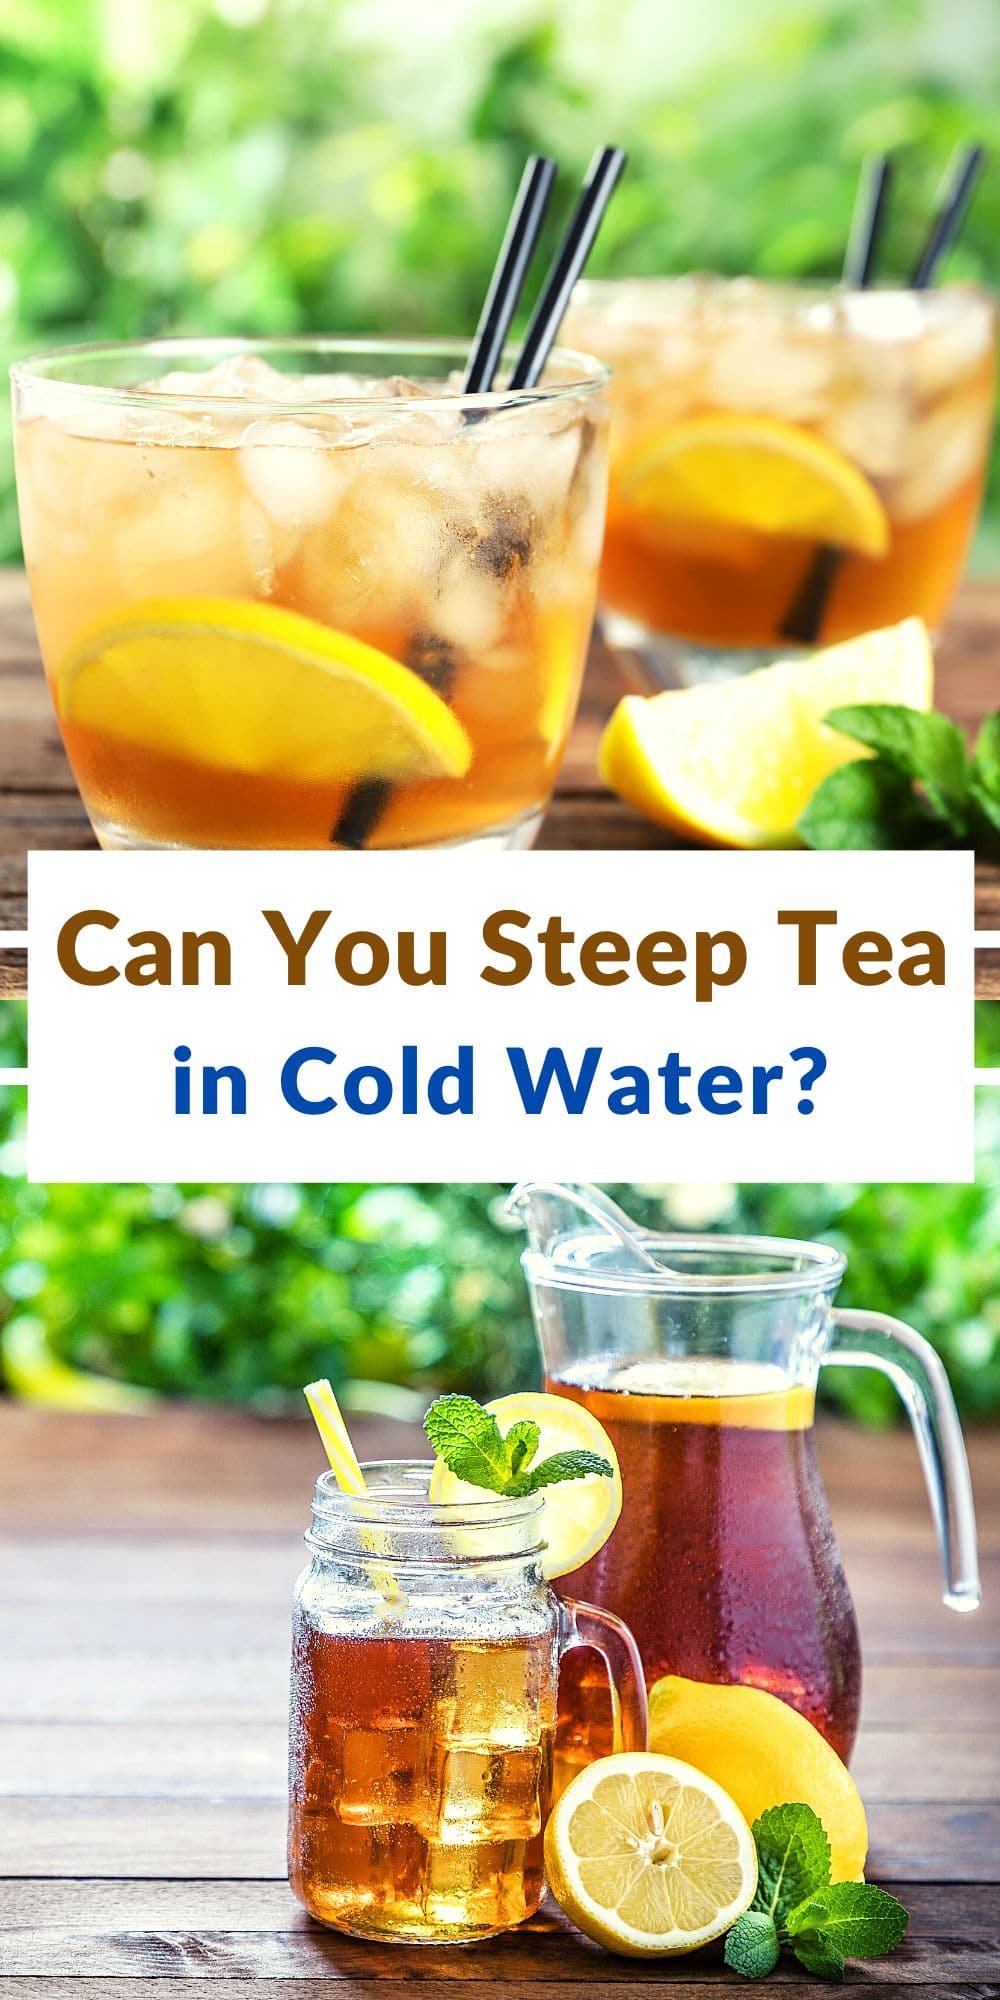 Can You Steep Tea in Cold Water